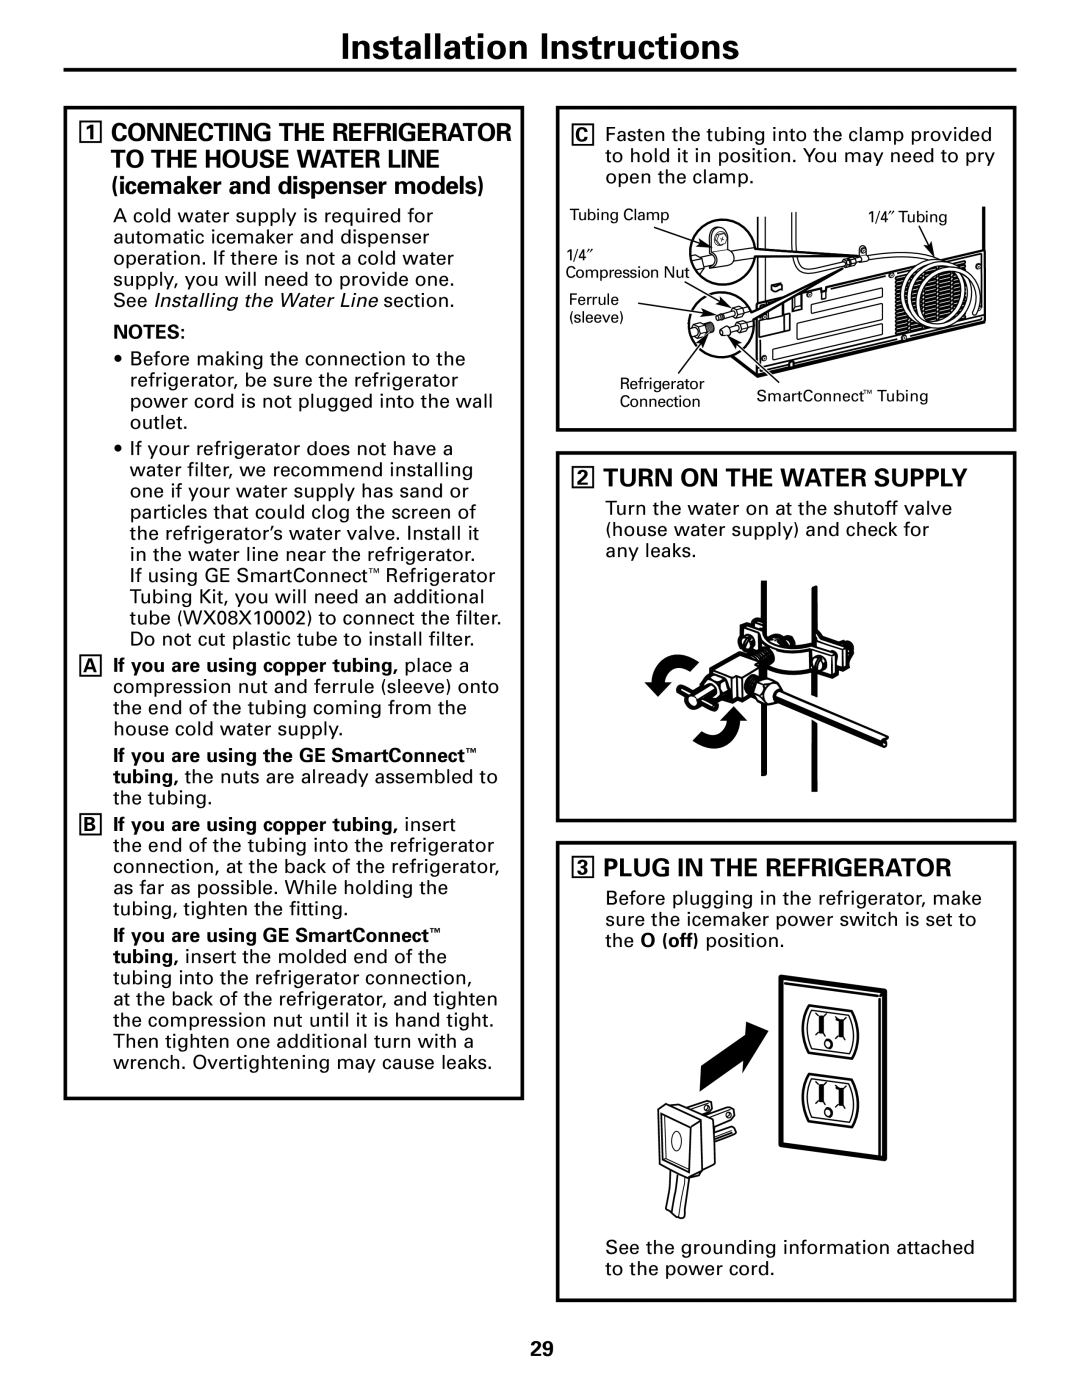 GE 200D8074P017 installation instructions Turn On The Water Supply, Plug In The Refrigerator, Installation Instructions 